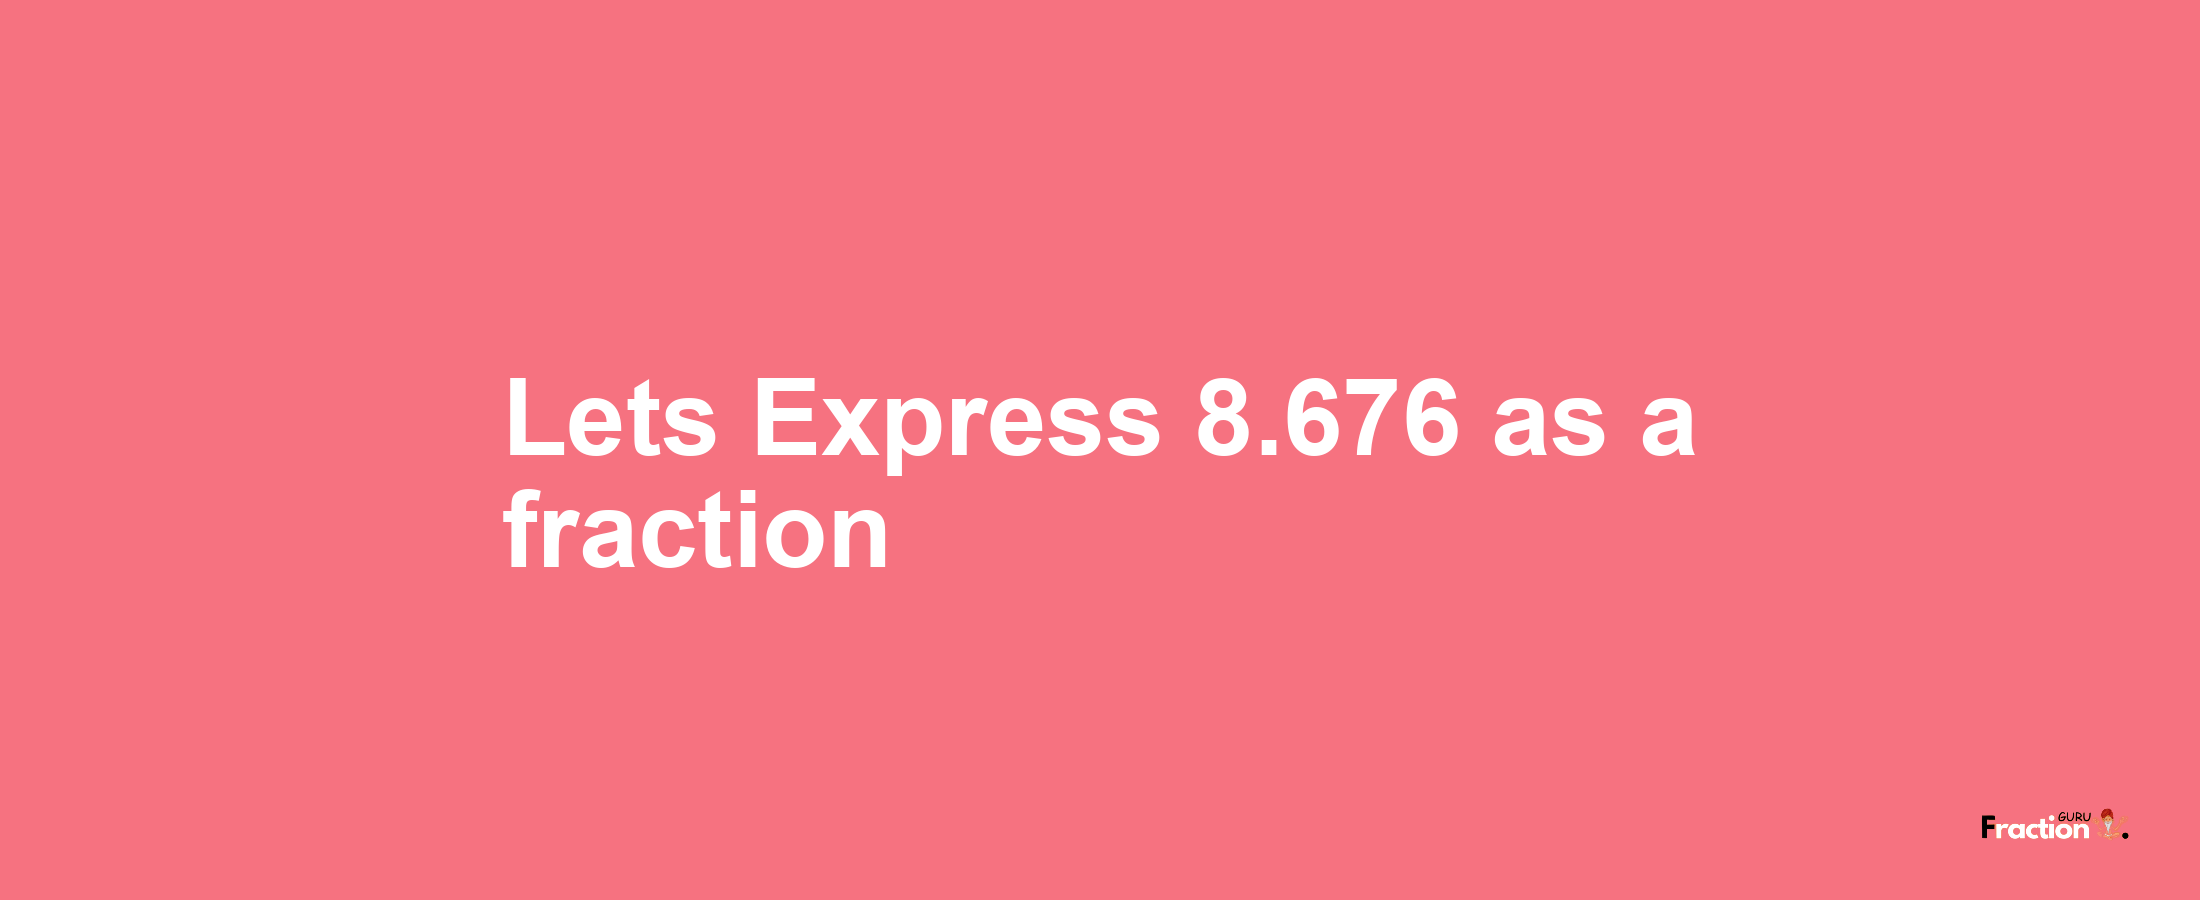 Lets Express 8.676 as afraction